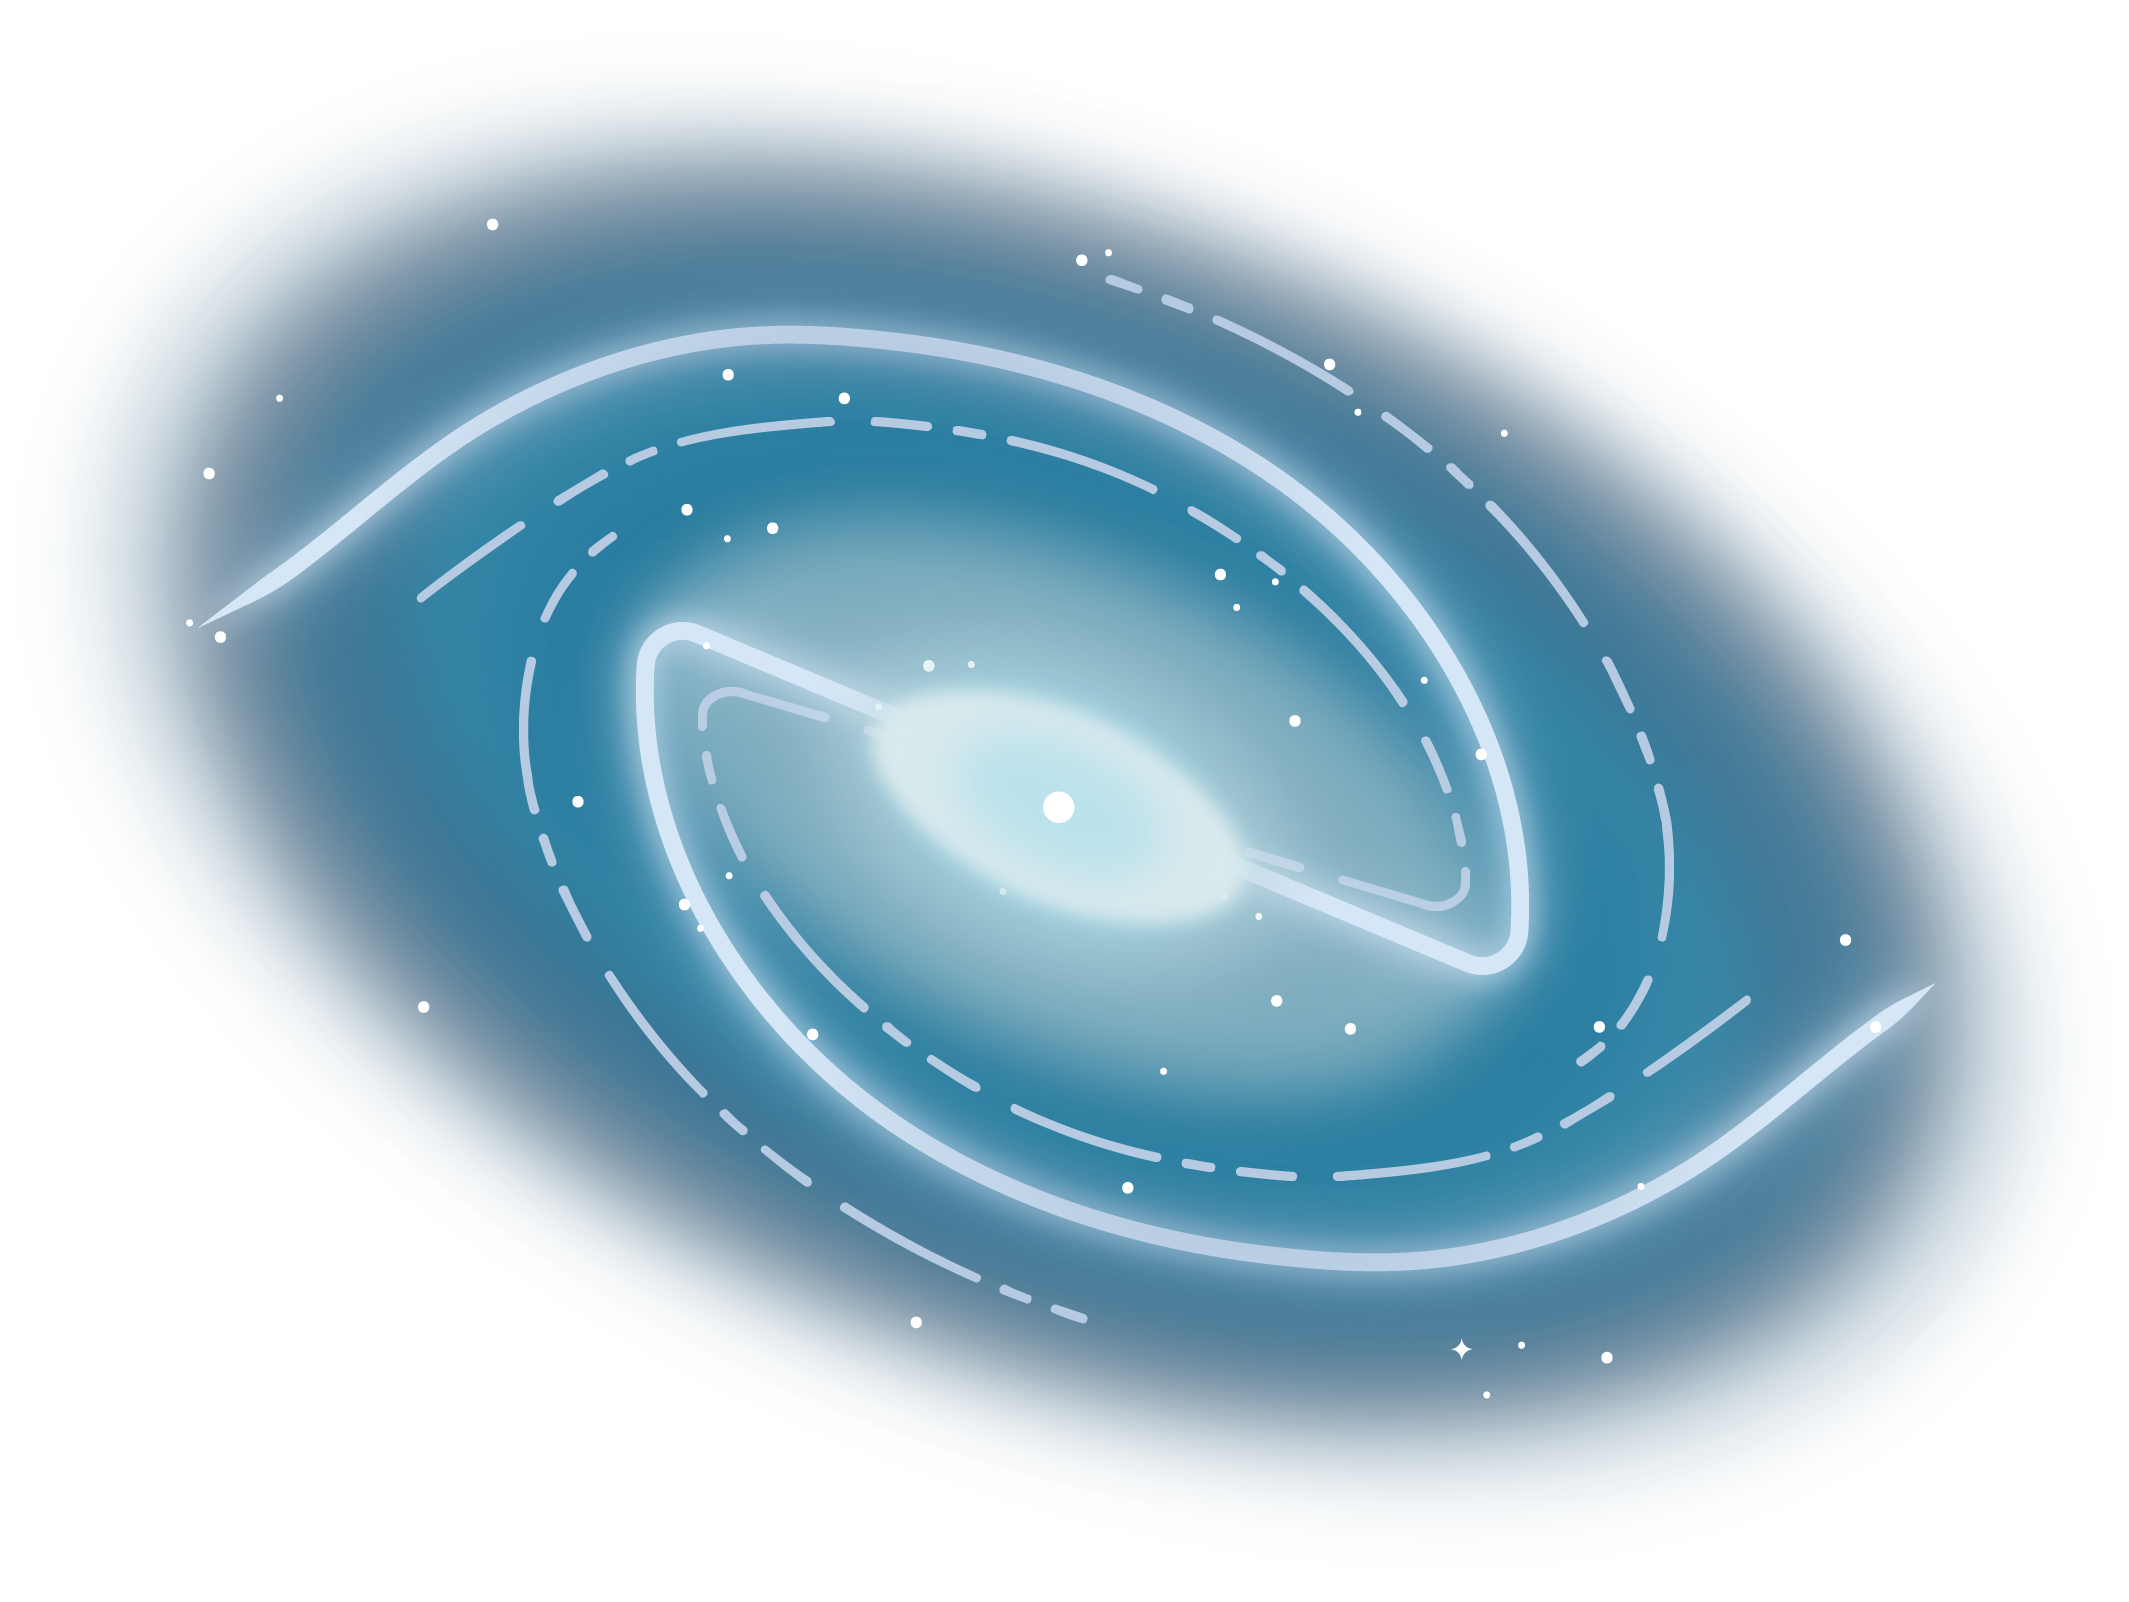 A background of medium, bright blue shows a bright, white, thin line that creates an oblong, elongated swirl that connects in the middle with a lighter blue, diffuse cloud. White dots representing stars speckle the image.